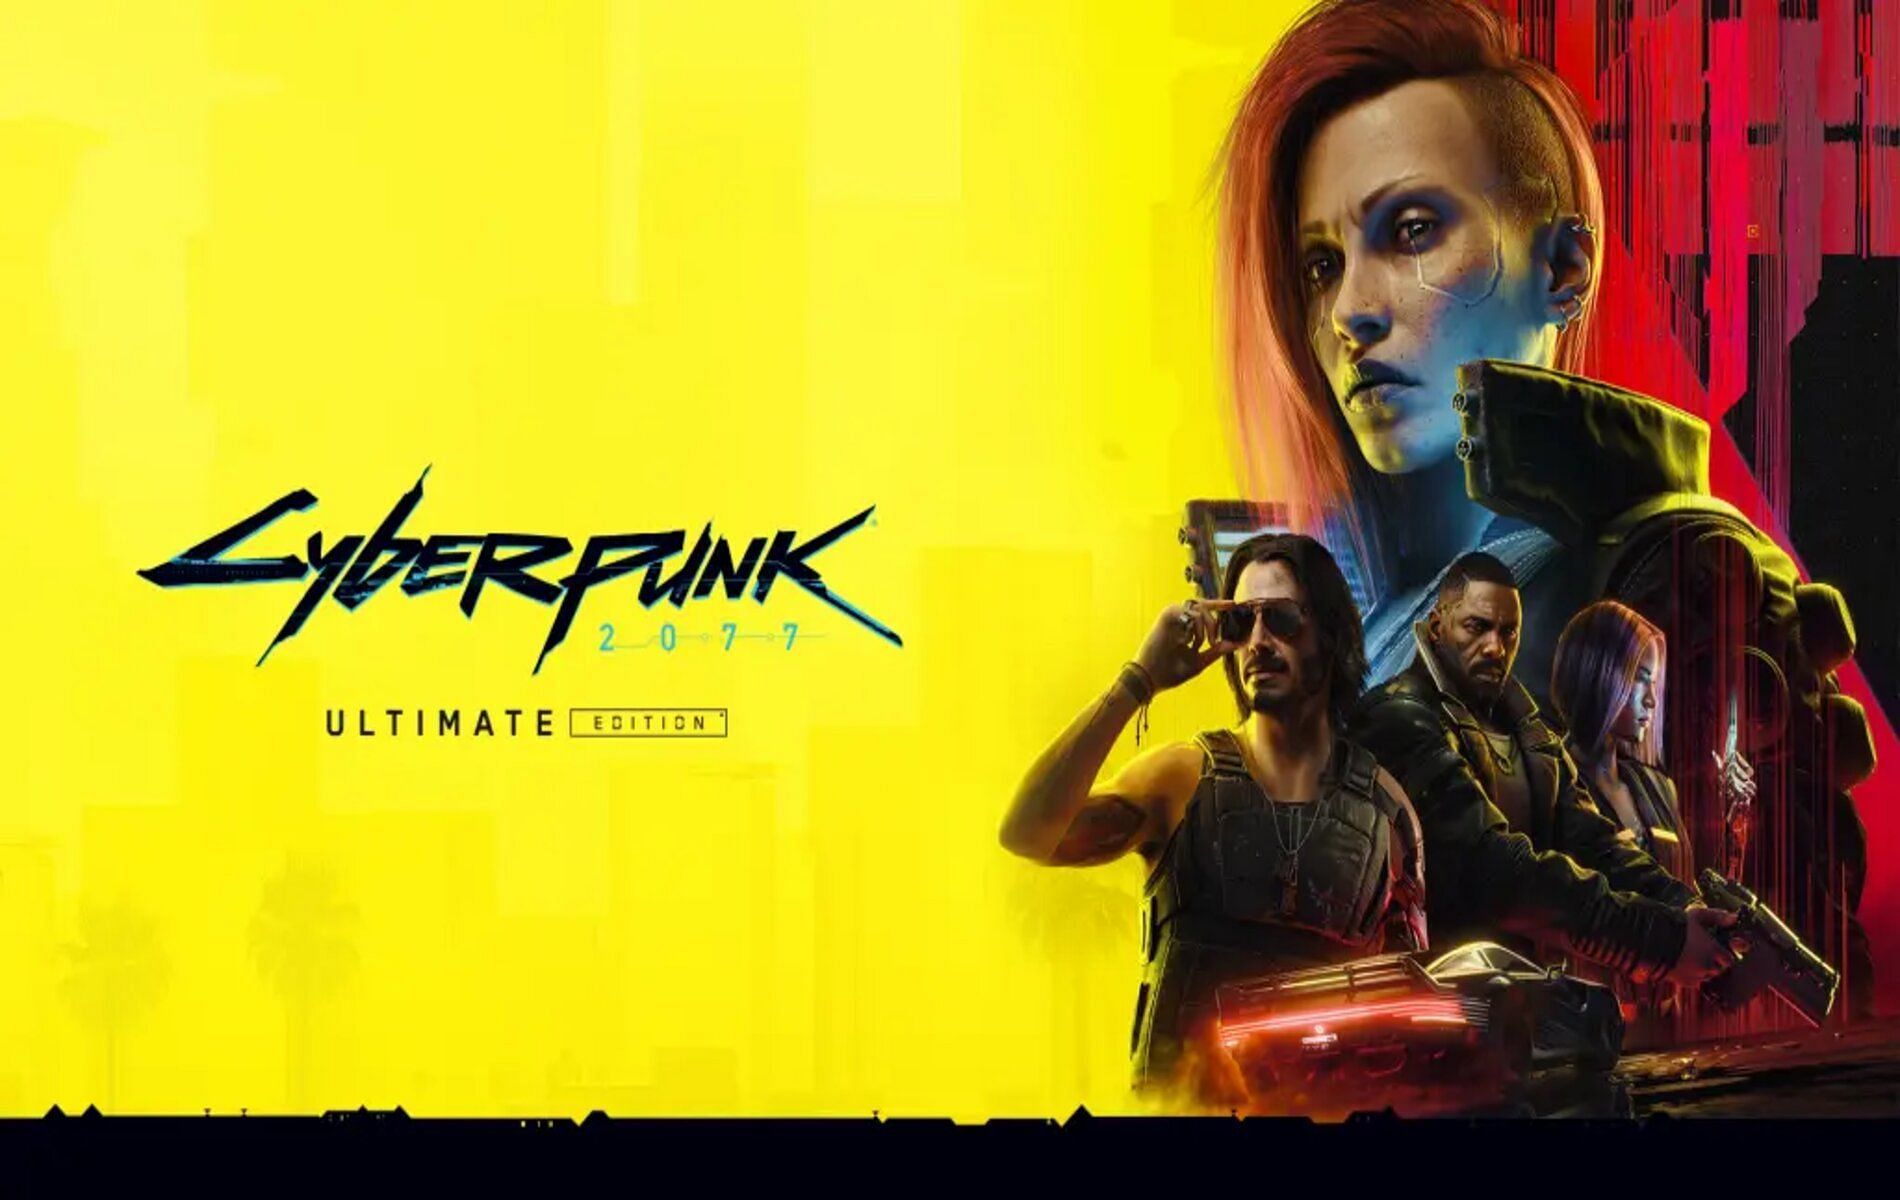 Official cover art for Cyberpunk 2077 Ultimate Edition